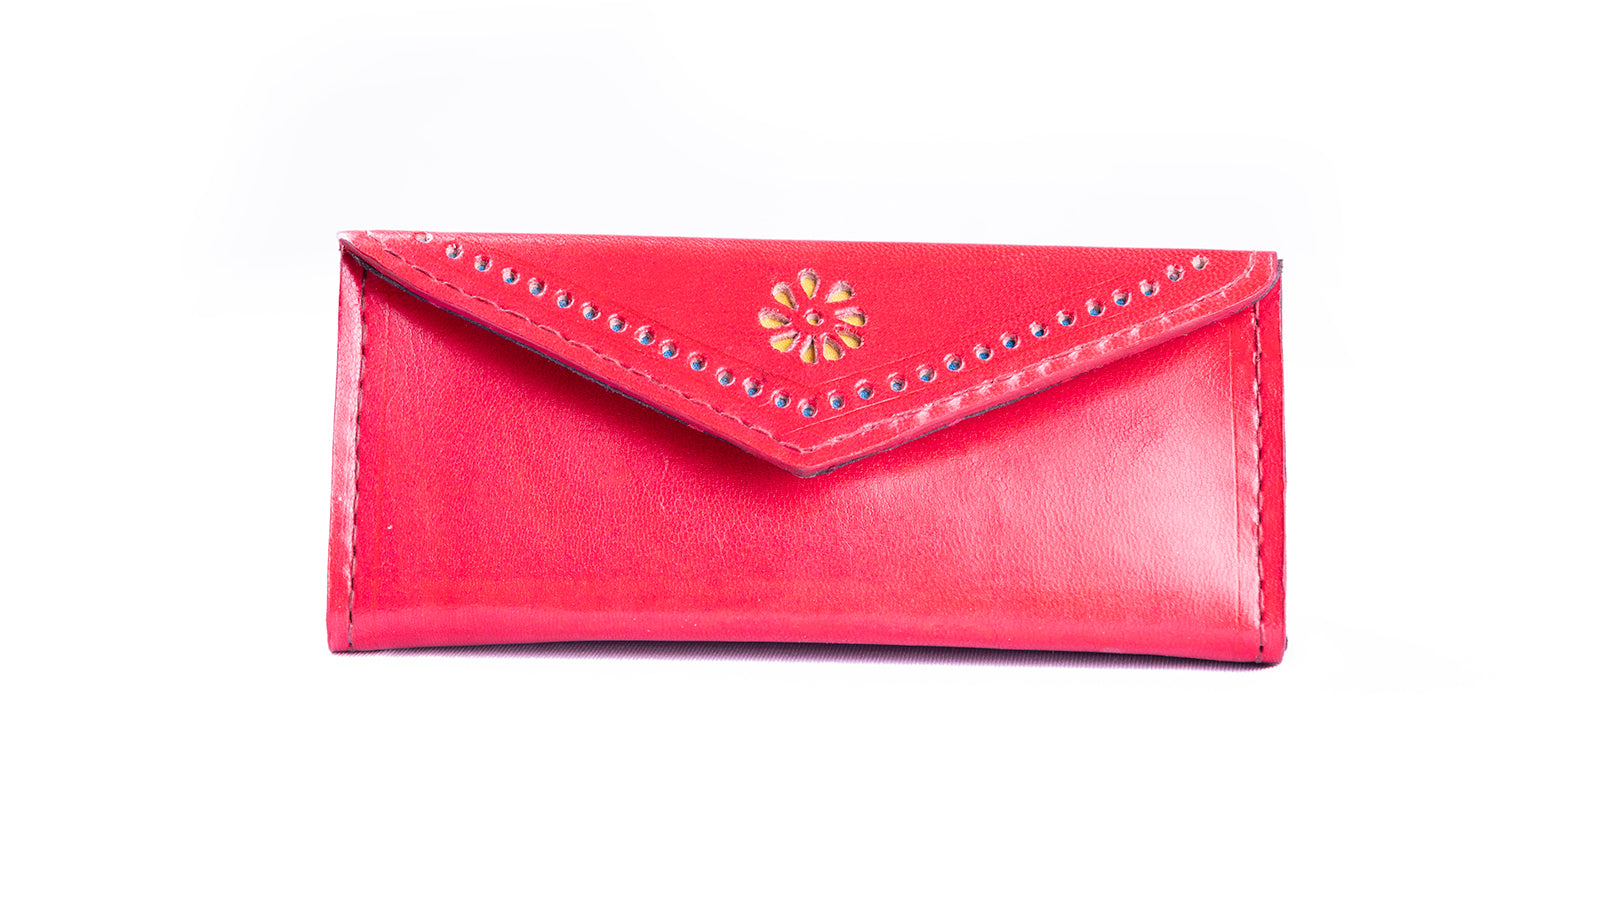 Leather Eyeglasses Hard Case Cover in Red - Zahabz